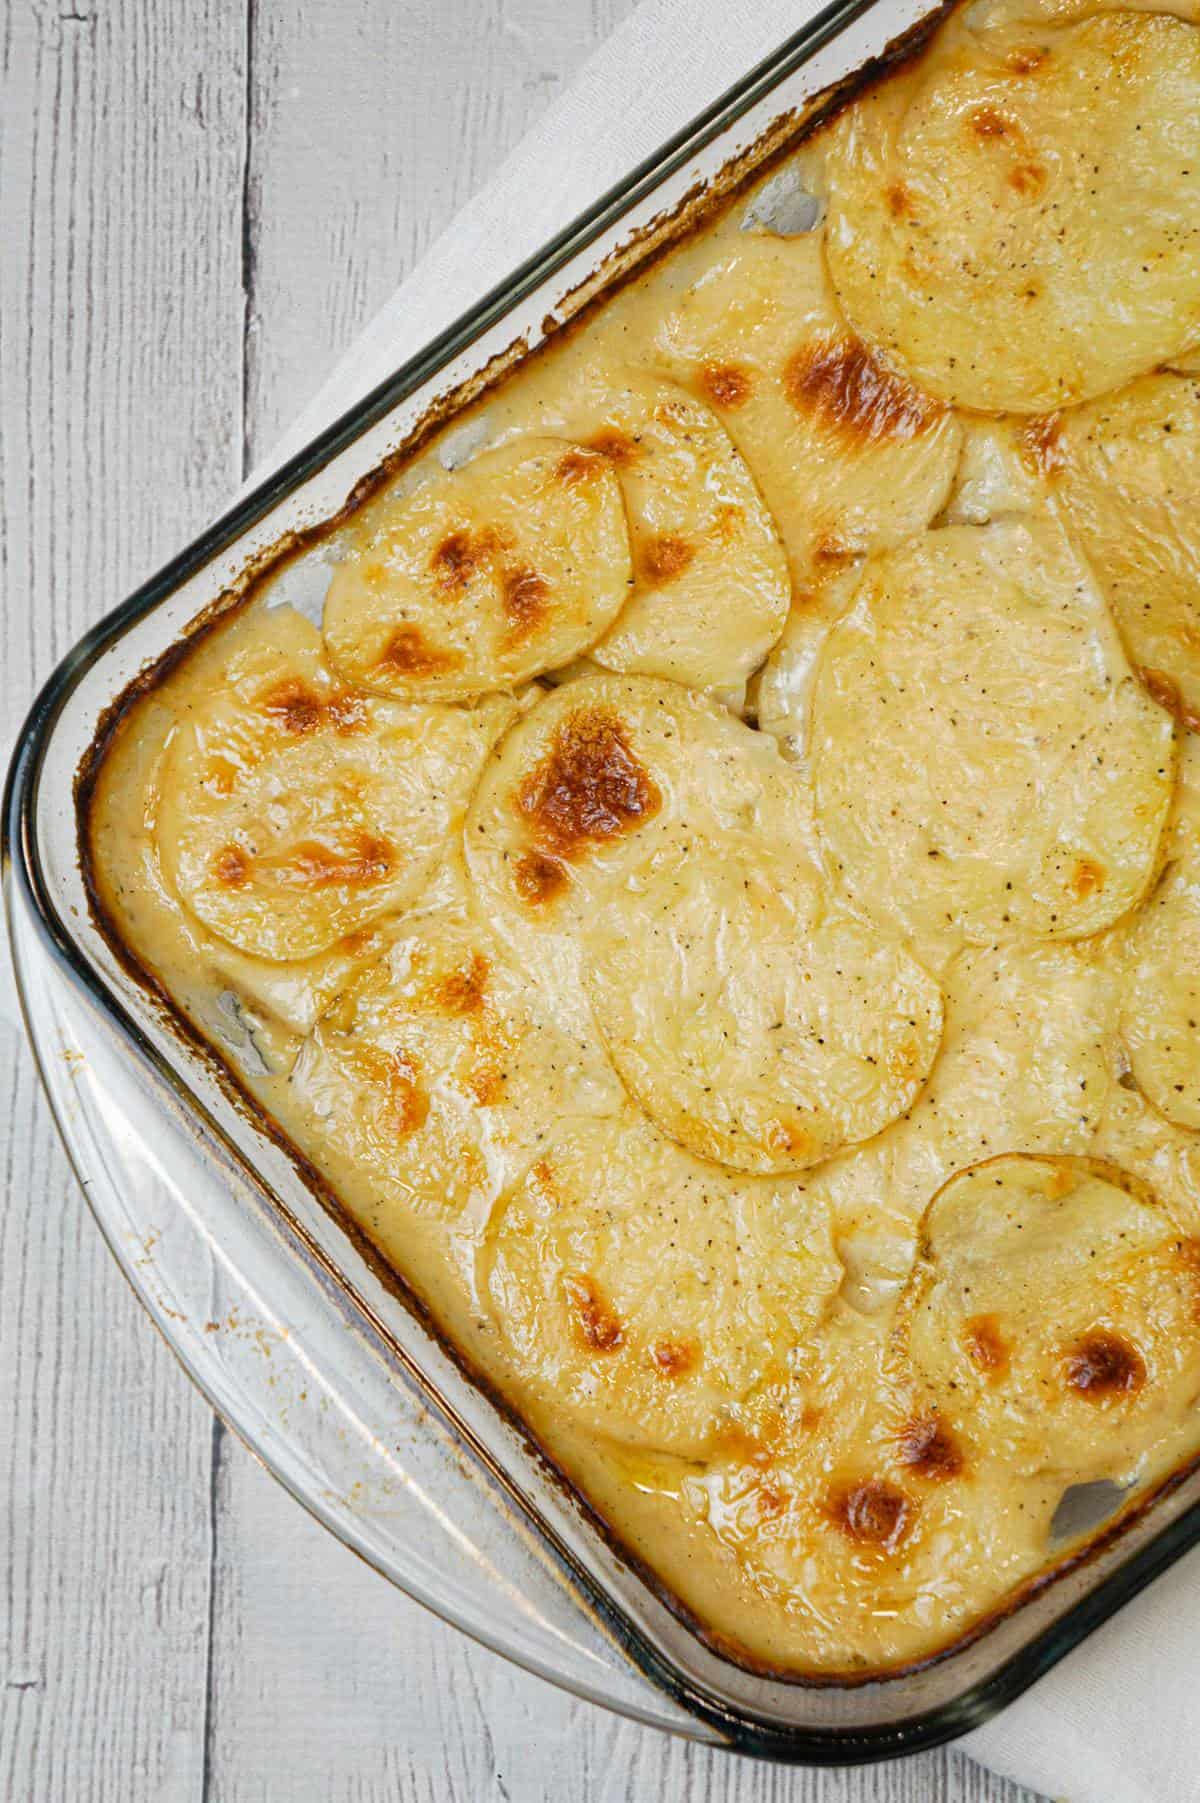 Scalloped Potatoes are a delicious side dish recipe made with thinly sliced potatoes layered with a creamy onion sauce and baked in the oven.